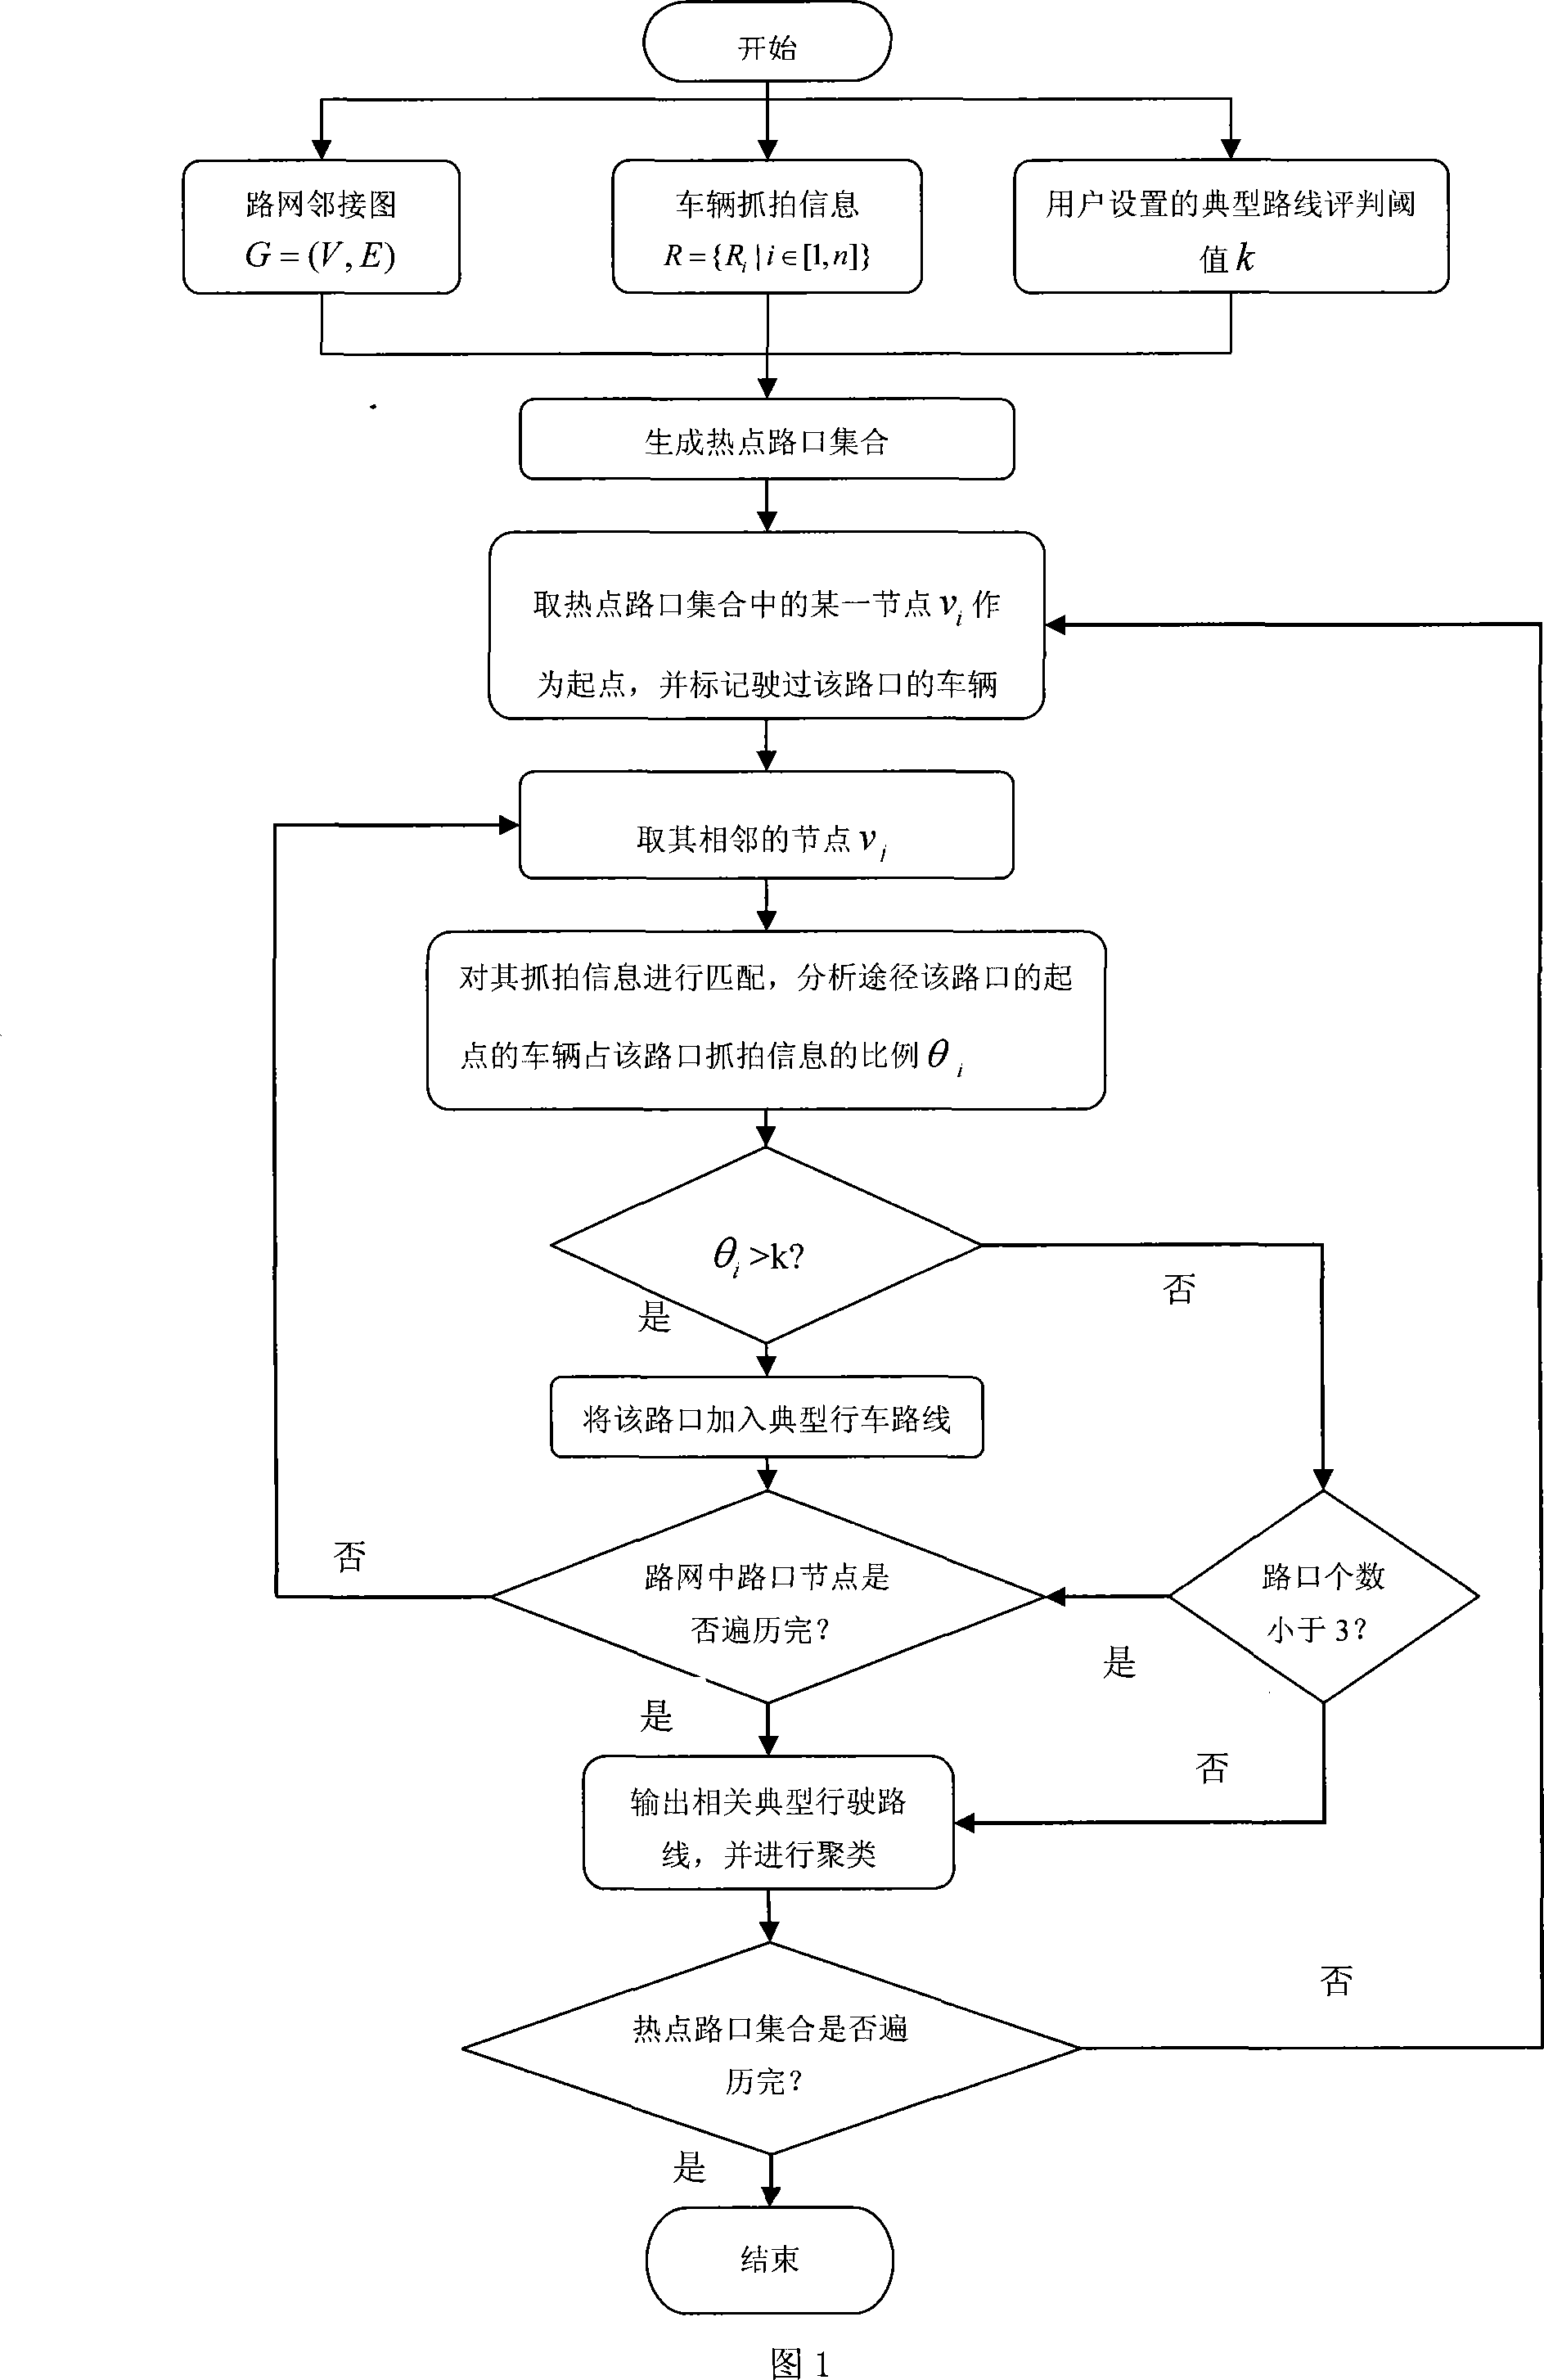 Method for analysis of prototype run route in urban traffic